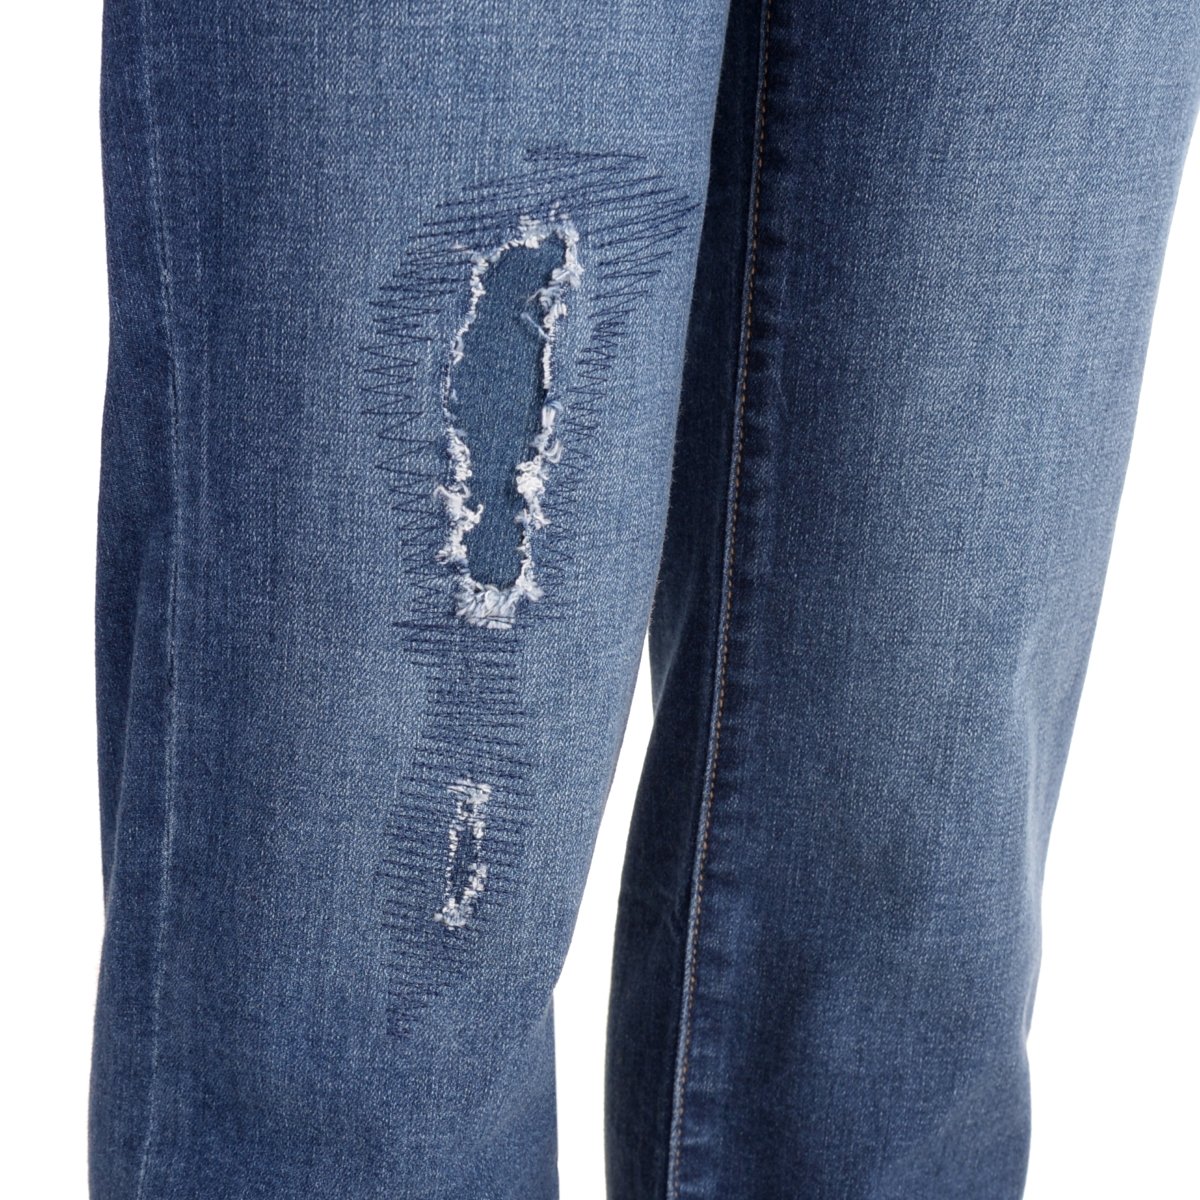 Jeans Skyes, Corte Recto